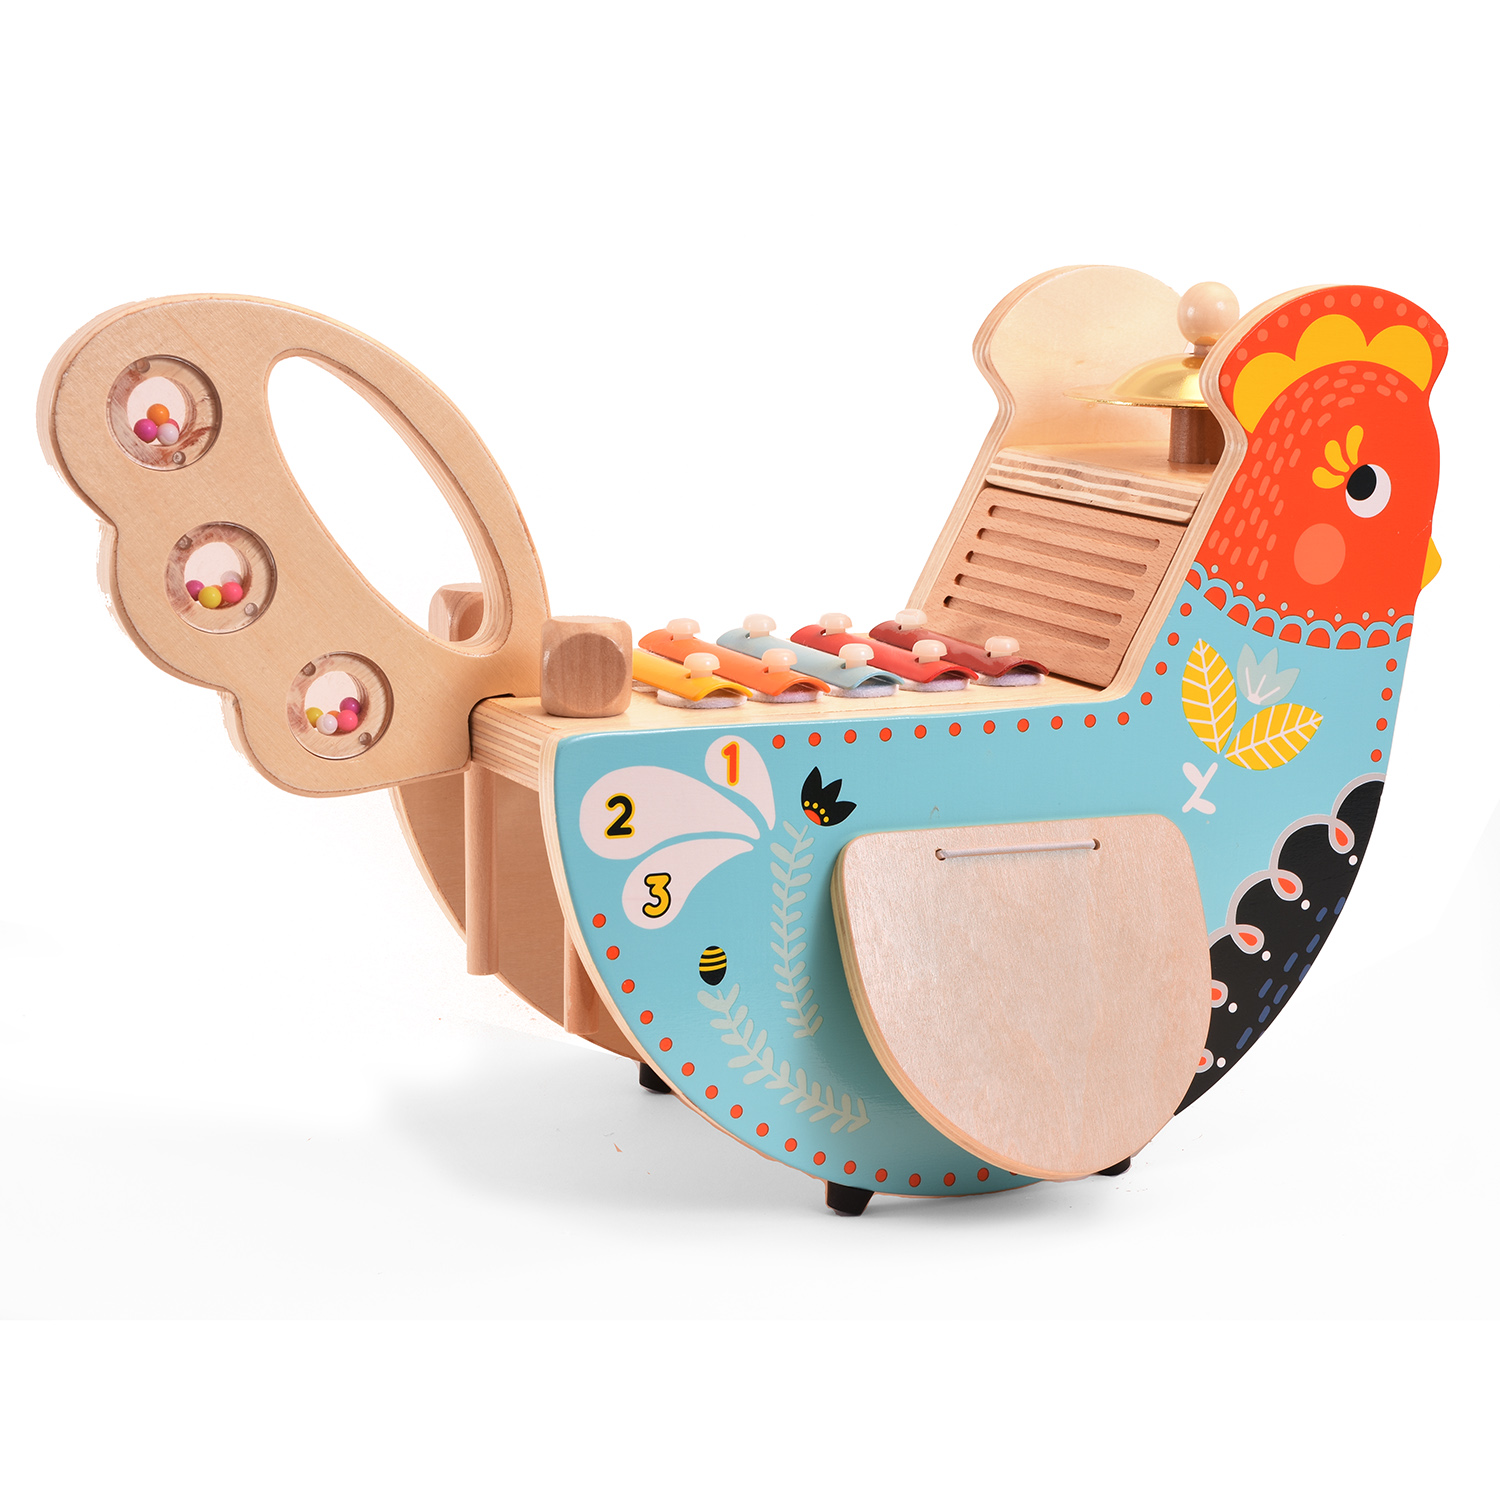 Manhattan Toy Musical Chicken Wooden Instrument for Toddlers with Xylophone, Drumsticks, Cymbal and Maraca - image 4 of 9